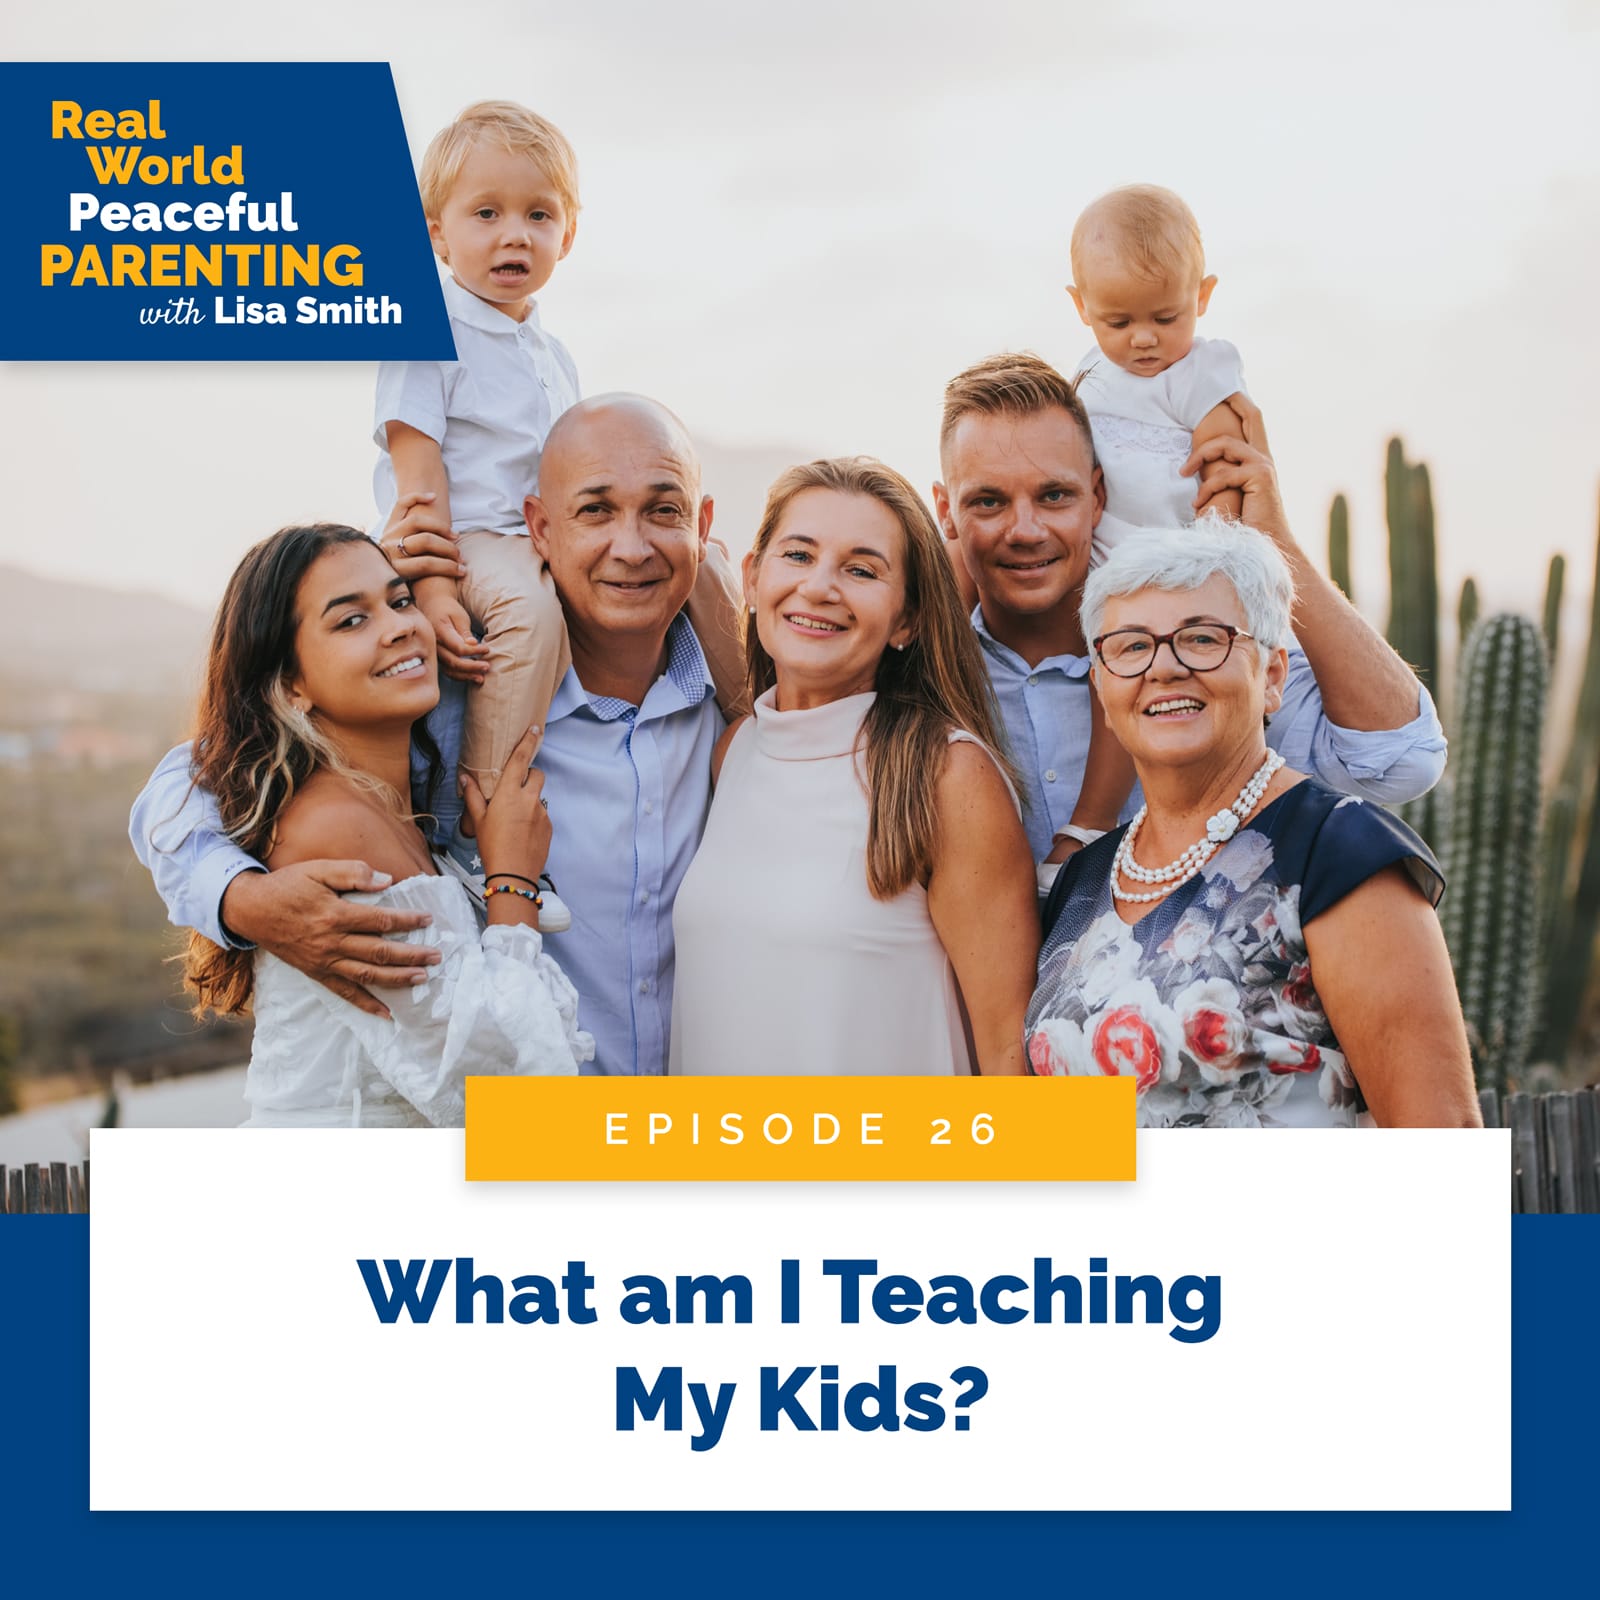 Real World Peaceful Parenting with Lisa Smith | What am I Teaching My Kids?